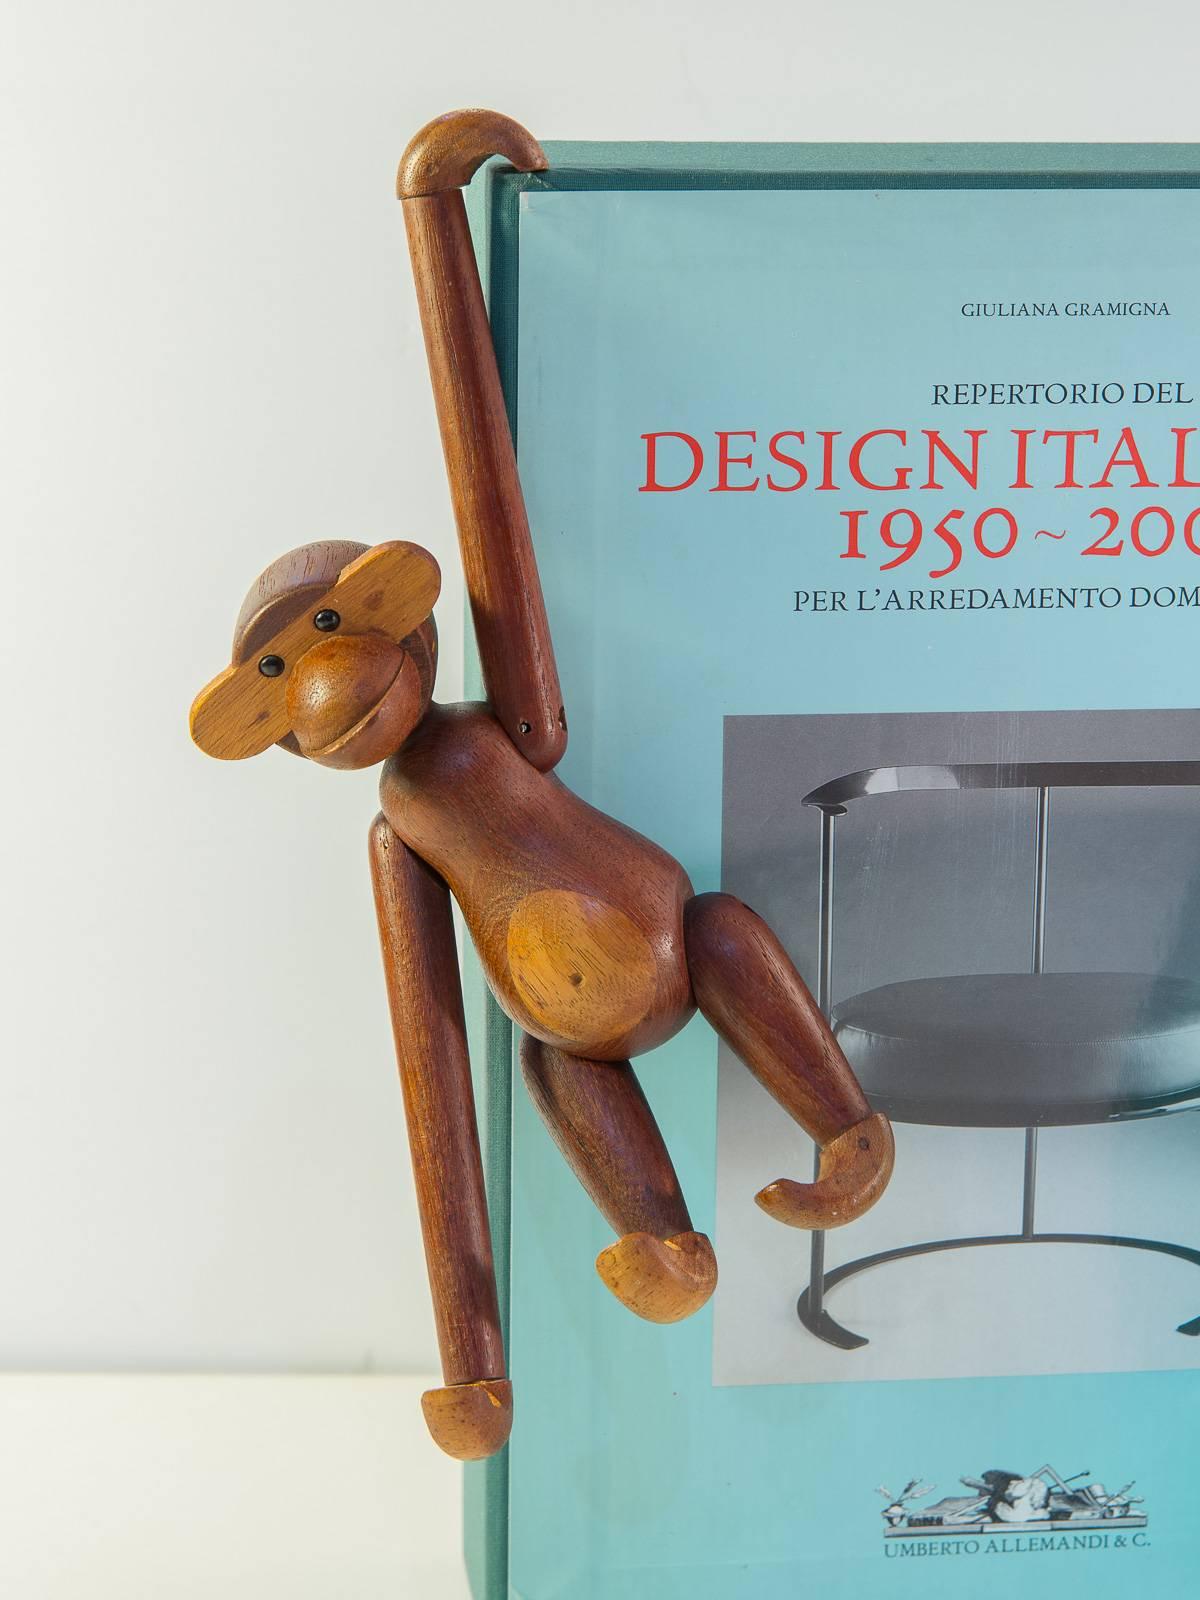 We have two vintage Kay Bojesen wooden toy monkeys. Designed in 1951, this smart toy is made of thirty-one carved pieces. The toy is durable, with a moveable form for hands at play, and the contrasting wood tonality demarcates form and expression. A